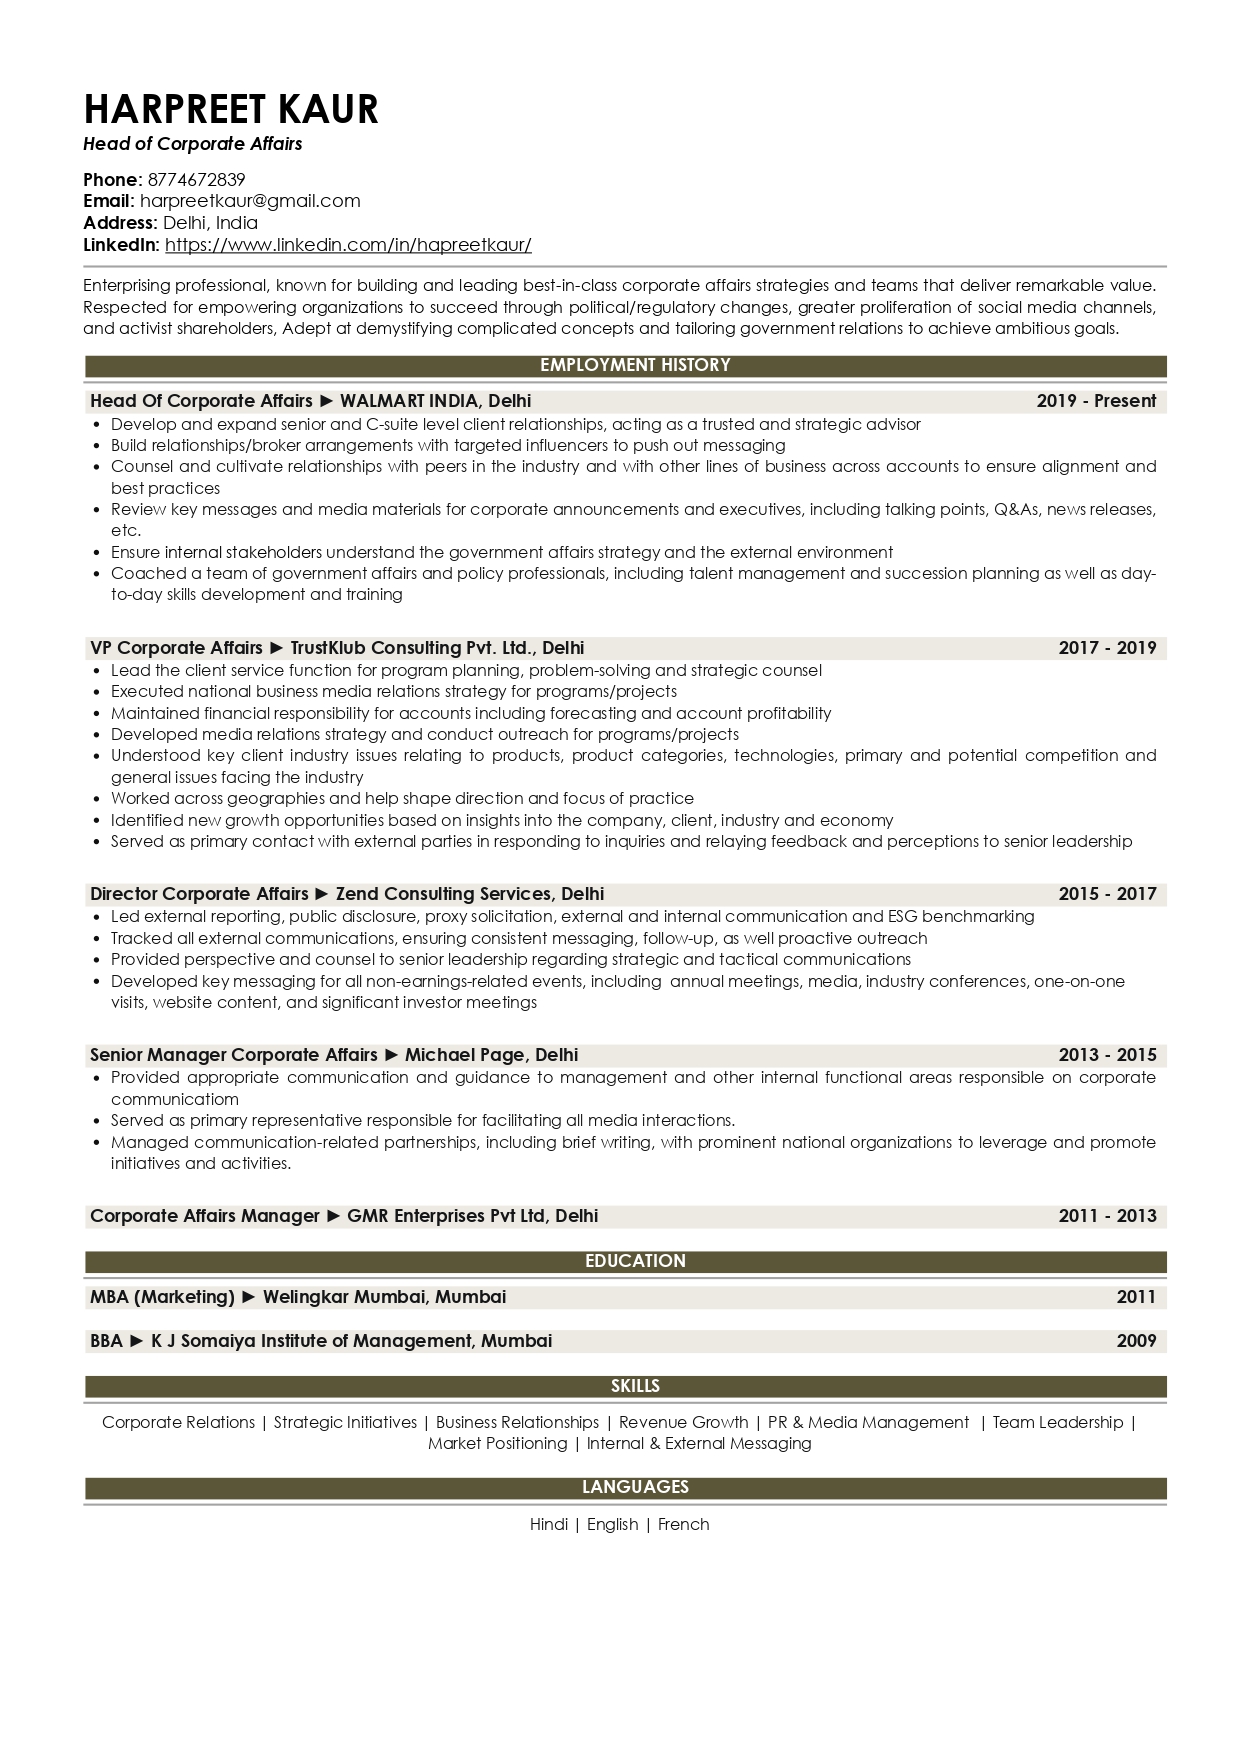 Sample Resume of Head of Corporate Affairs | Free Resume Templates & Samples on Resumod.co